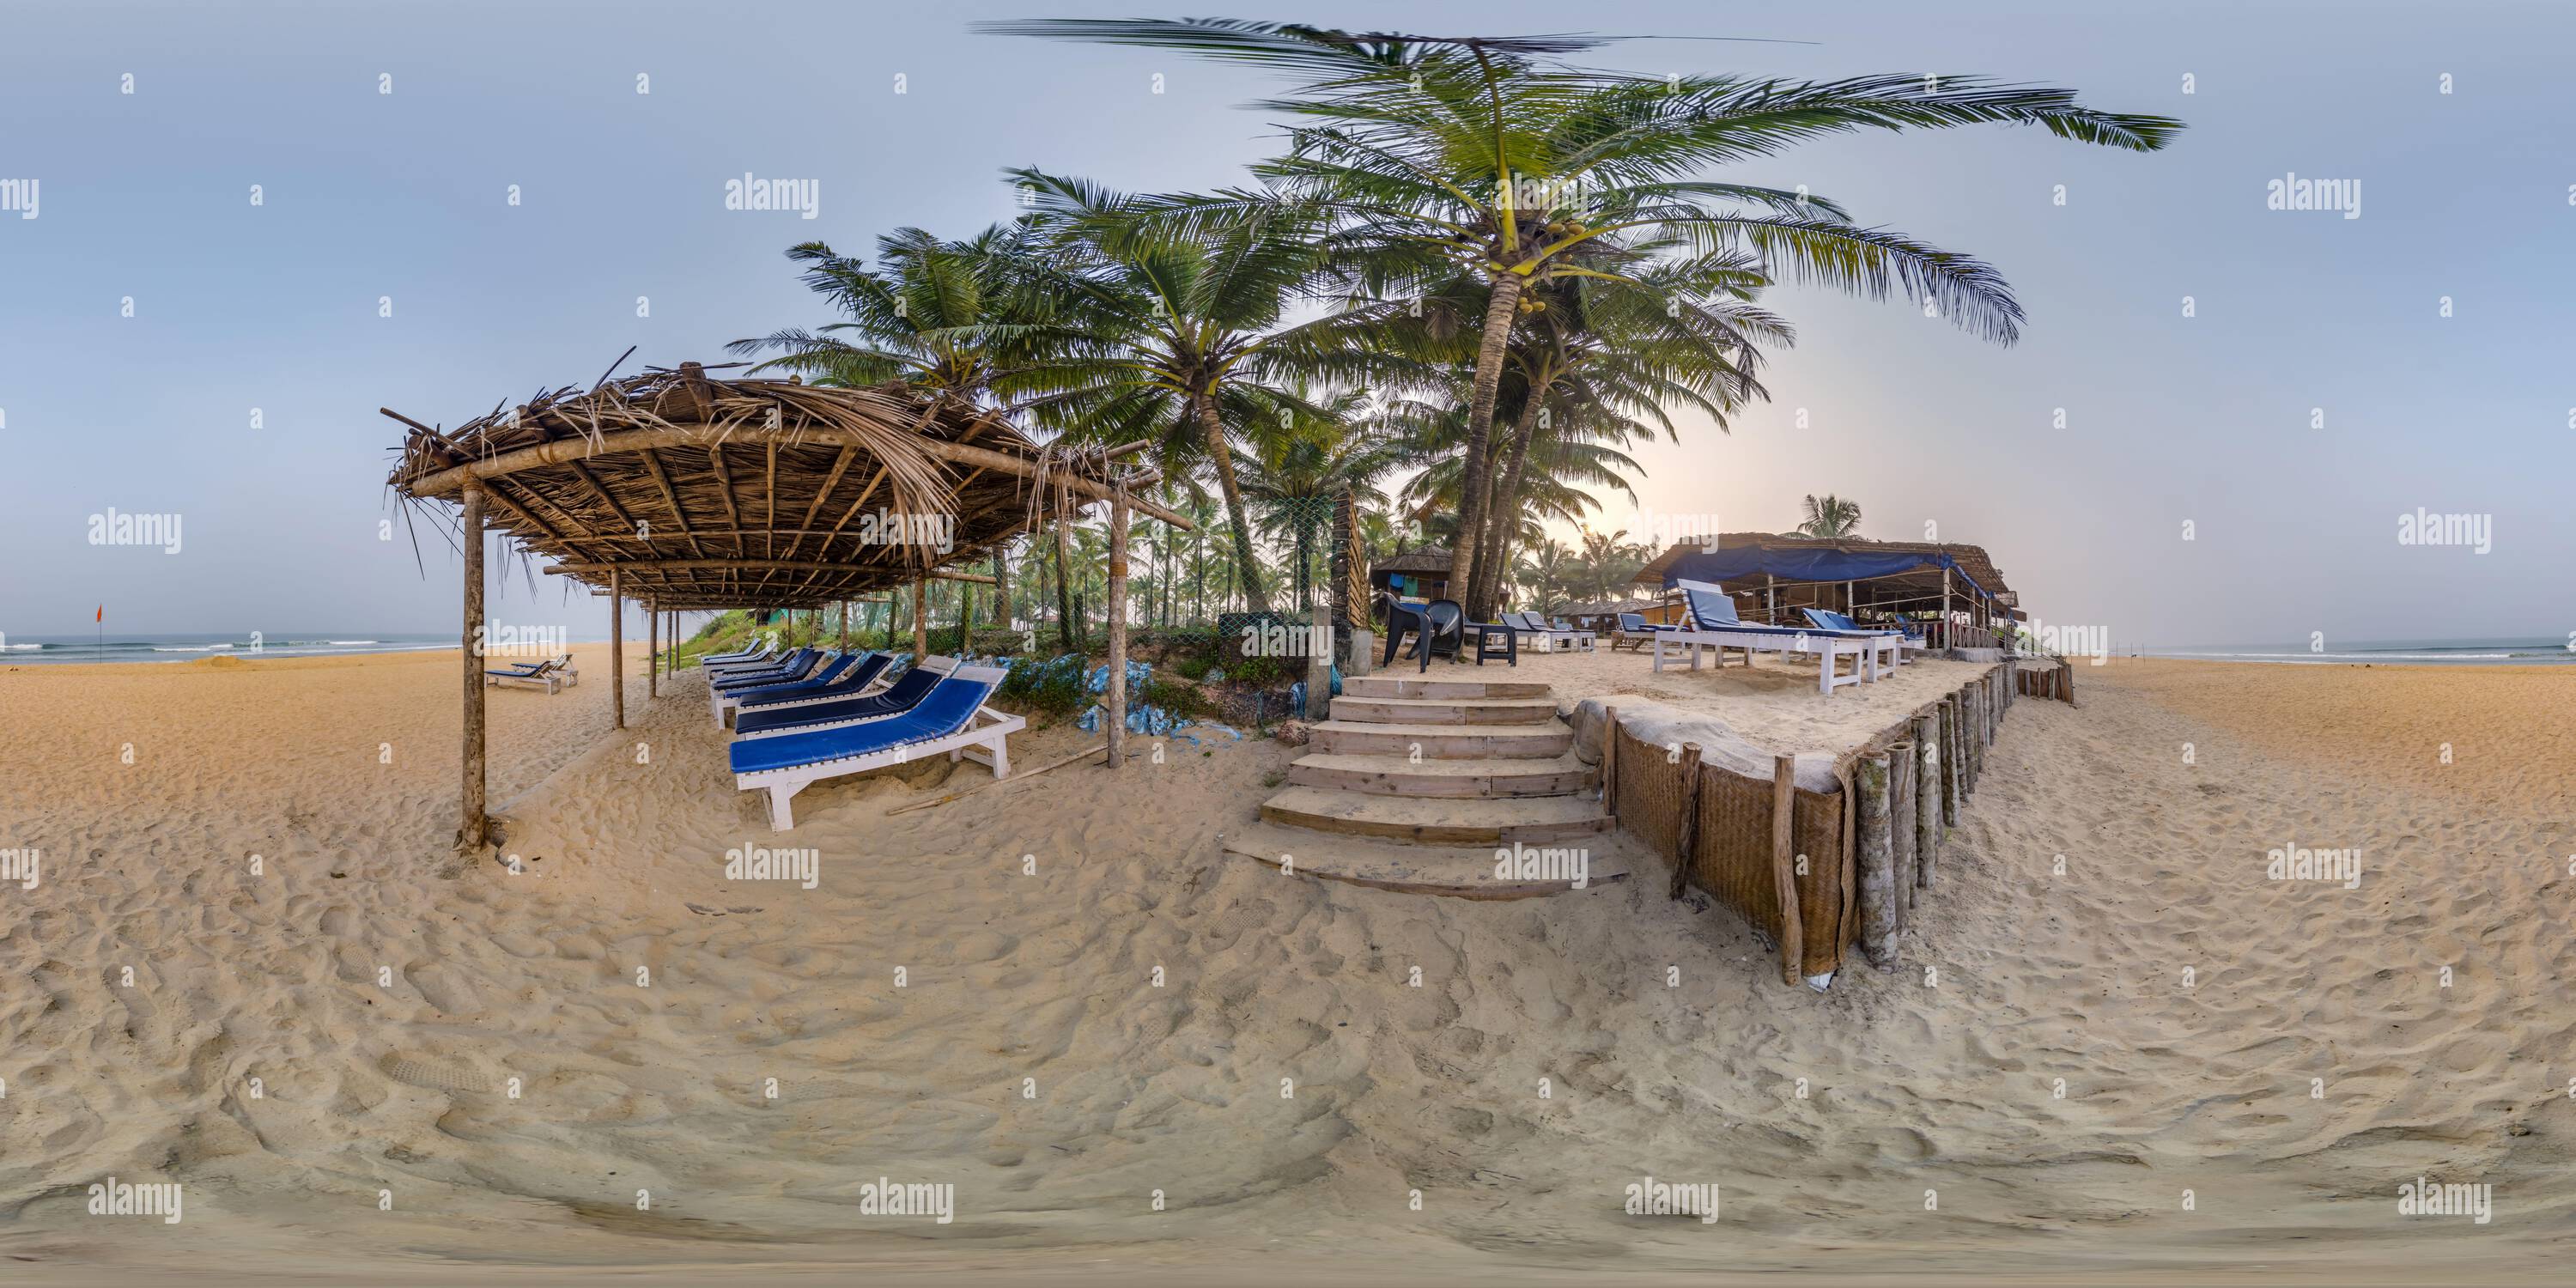 360 degree panoramic view of 360 hdri panorama with coconut trees on ocean coast near tropical shack or open cafe on beach with sunbeds in equirectangular spherical seamless proje